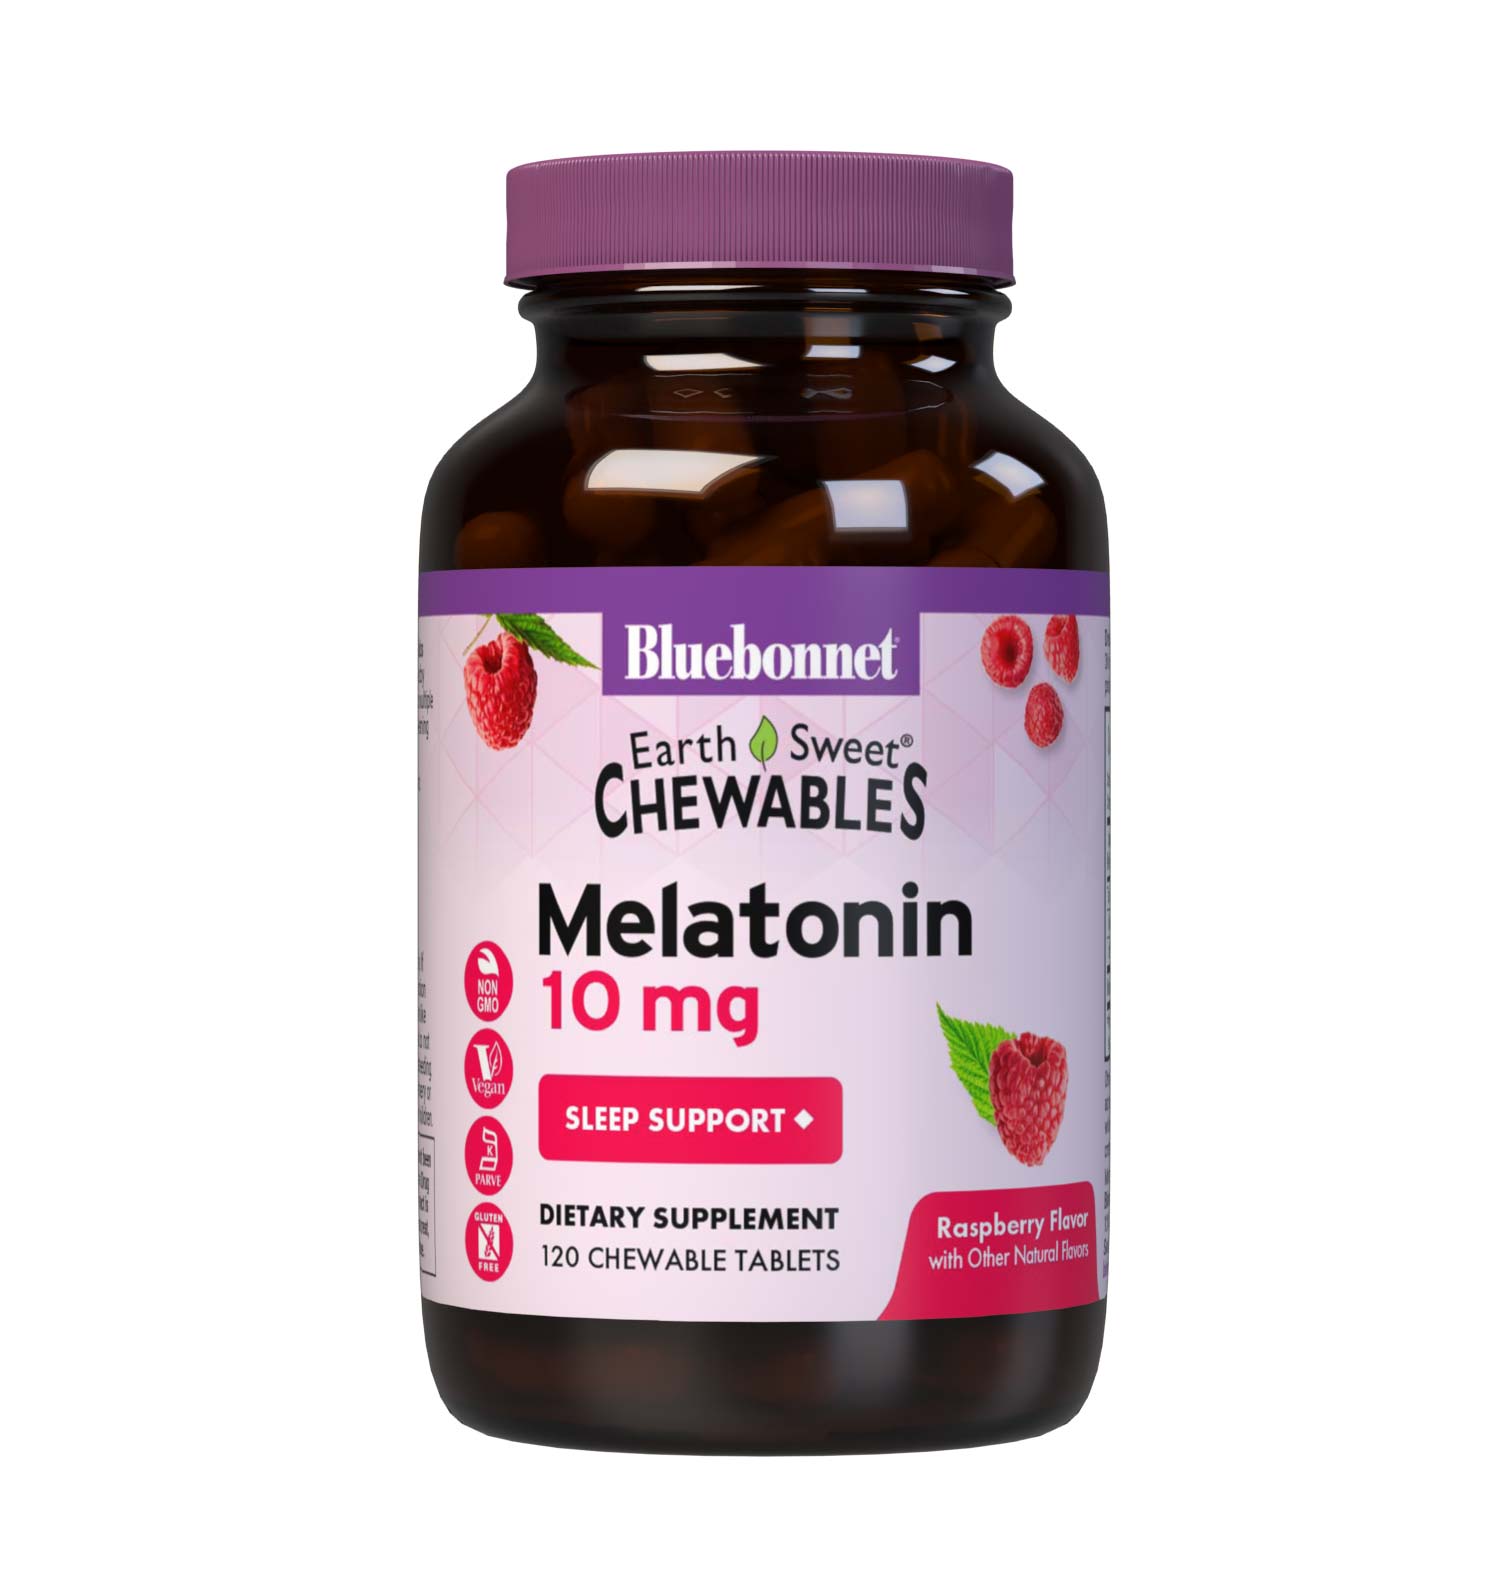 Bluebonnet’s EarthSweet Chewables Melatonin 10 mg 120 Tablets help minimize occasional sleeplessness for those affected by disturbed sleep/wake cycles, such as those traveling across multiple time zones. This product is sweetened with EarthSweet, a proprietary mix of fruit powders and sugar cane crystals. #size_120 count